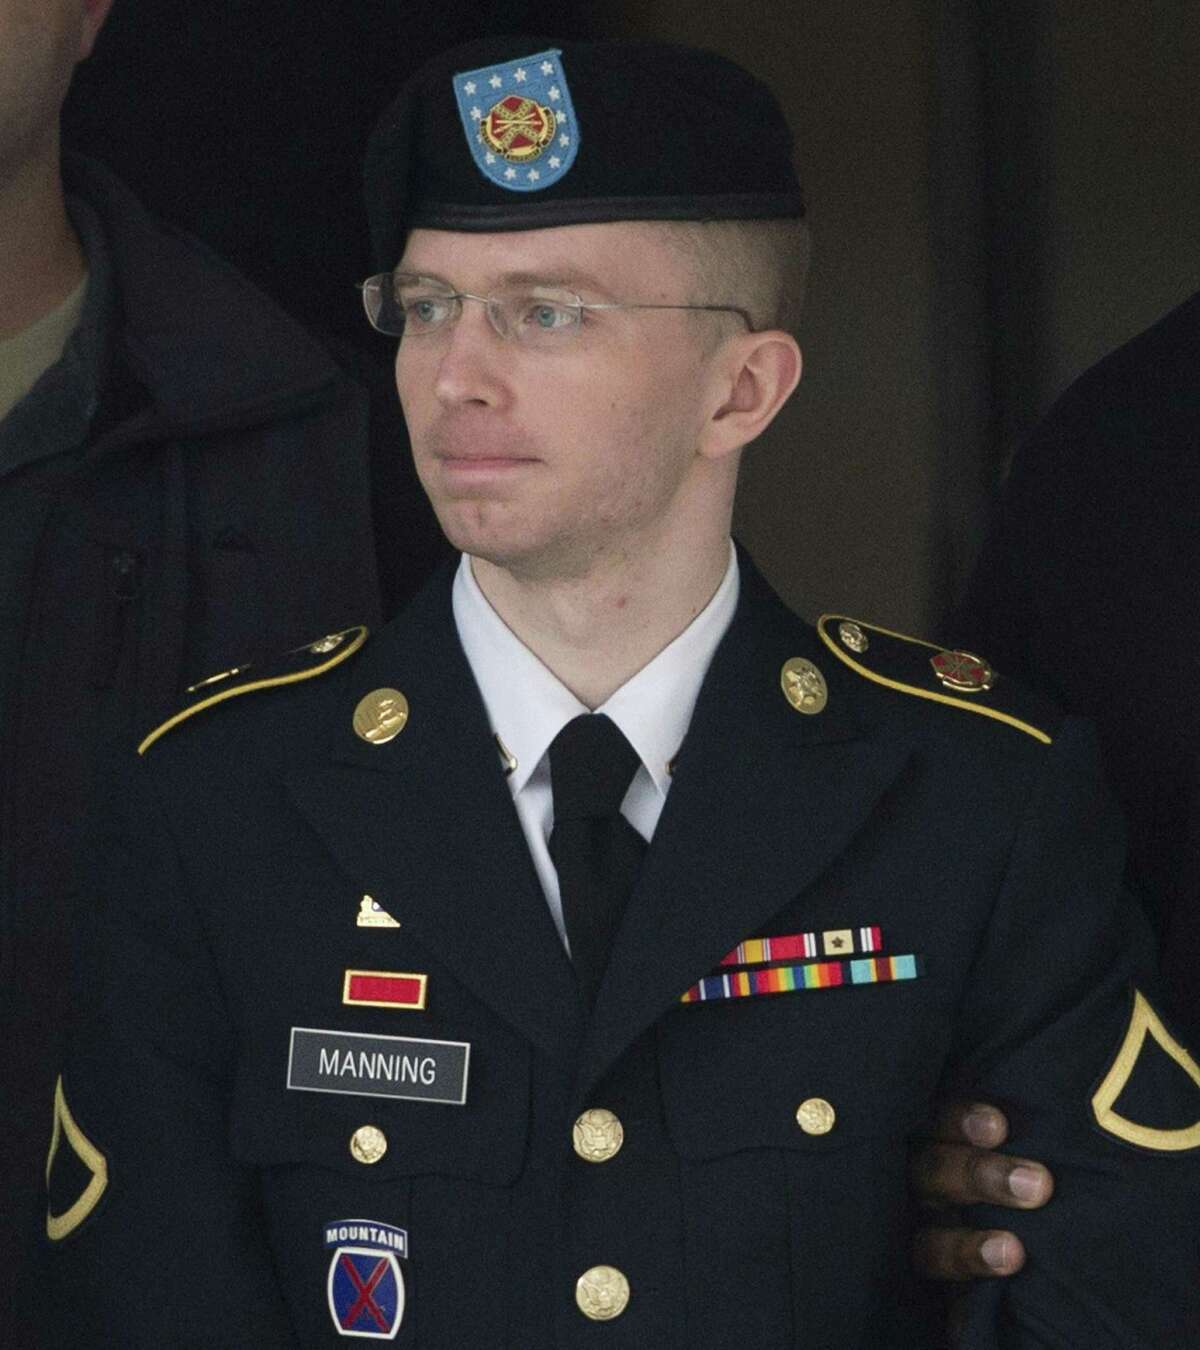 Army Pfc. Bradley Manning, now known as Chelsea Manning, received a com muted sentence.